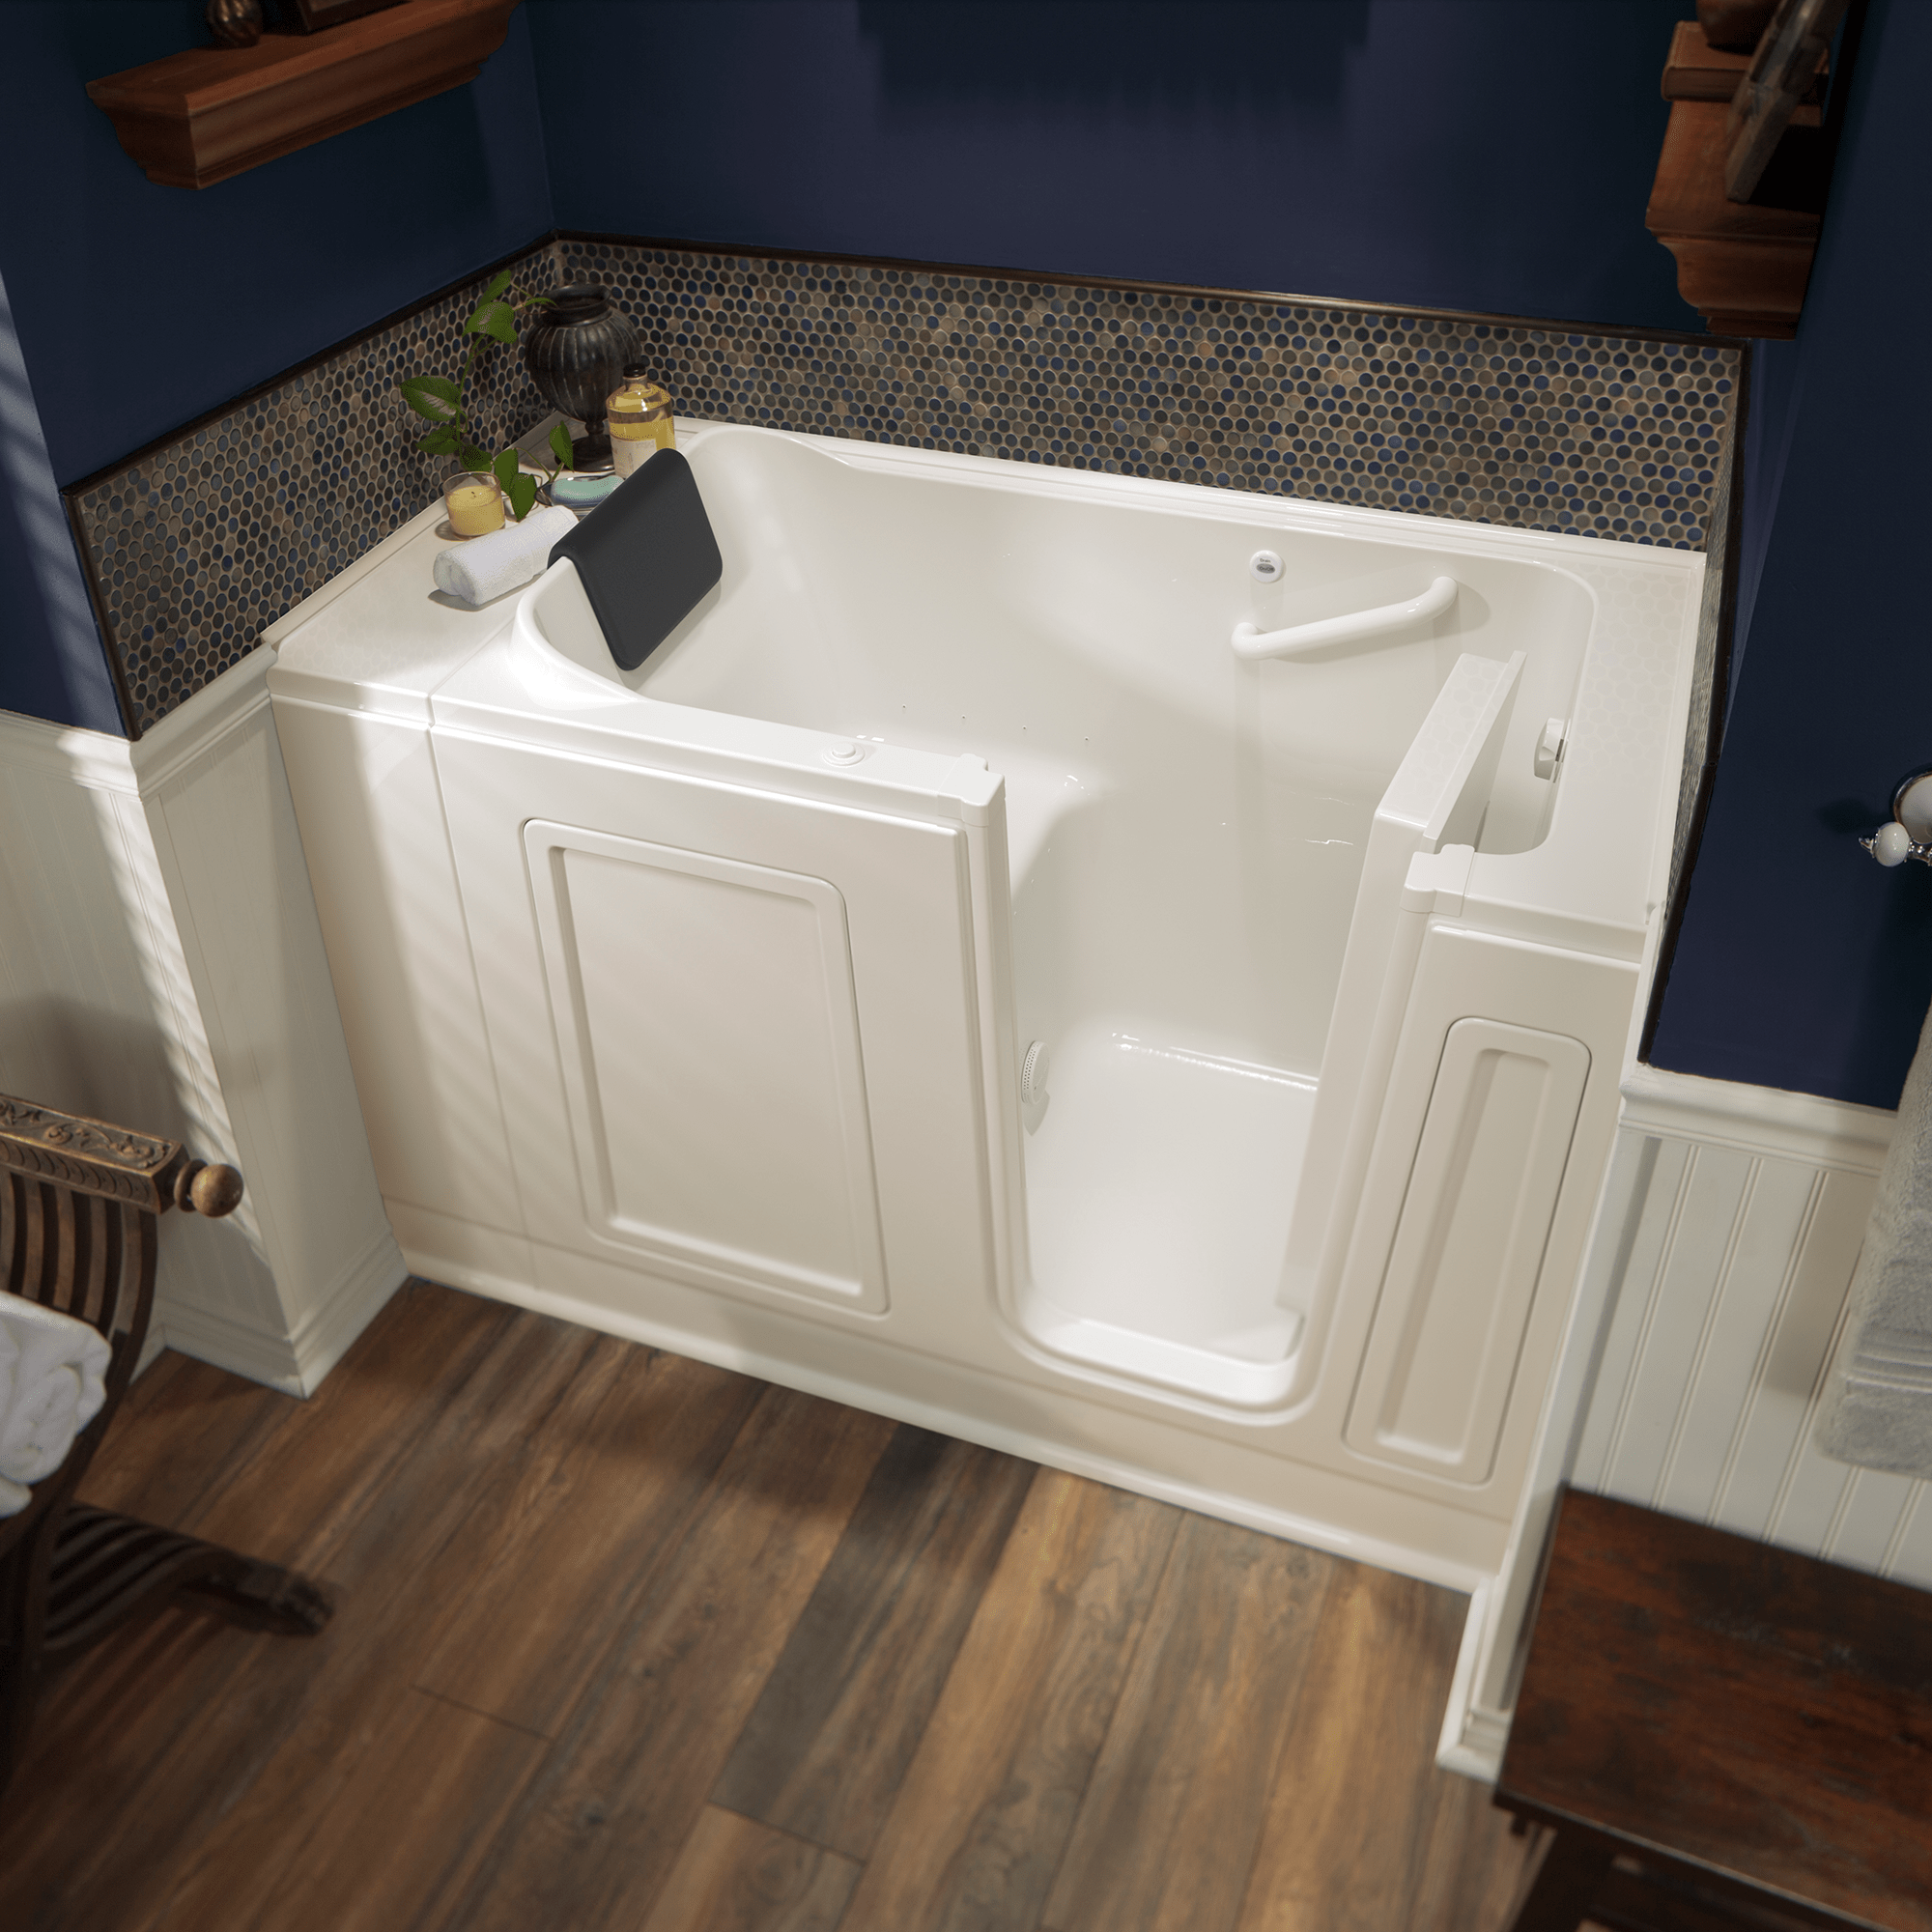 Acrylic Luxury Series 30 x 51 -Inch Walk-in Tub With Air Spa System - Right-Hand Drain